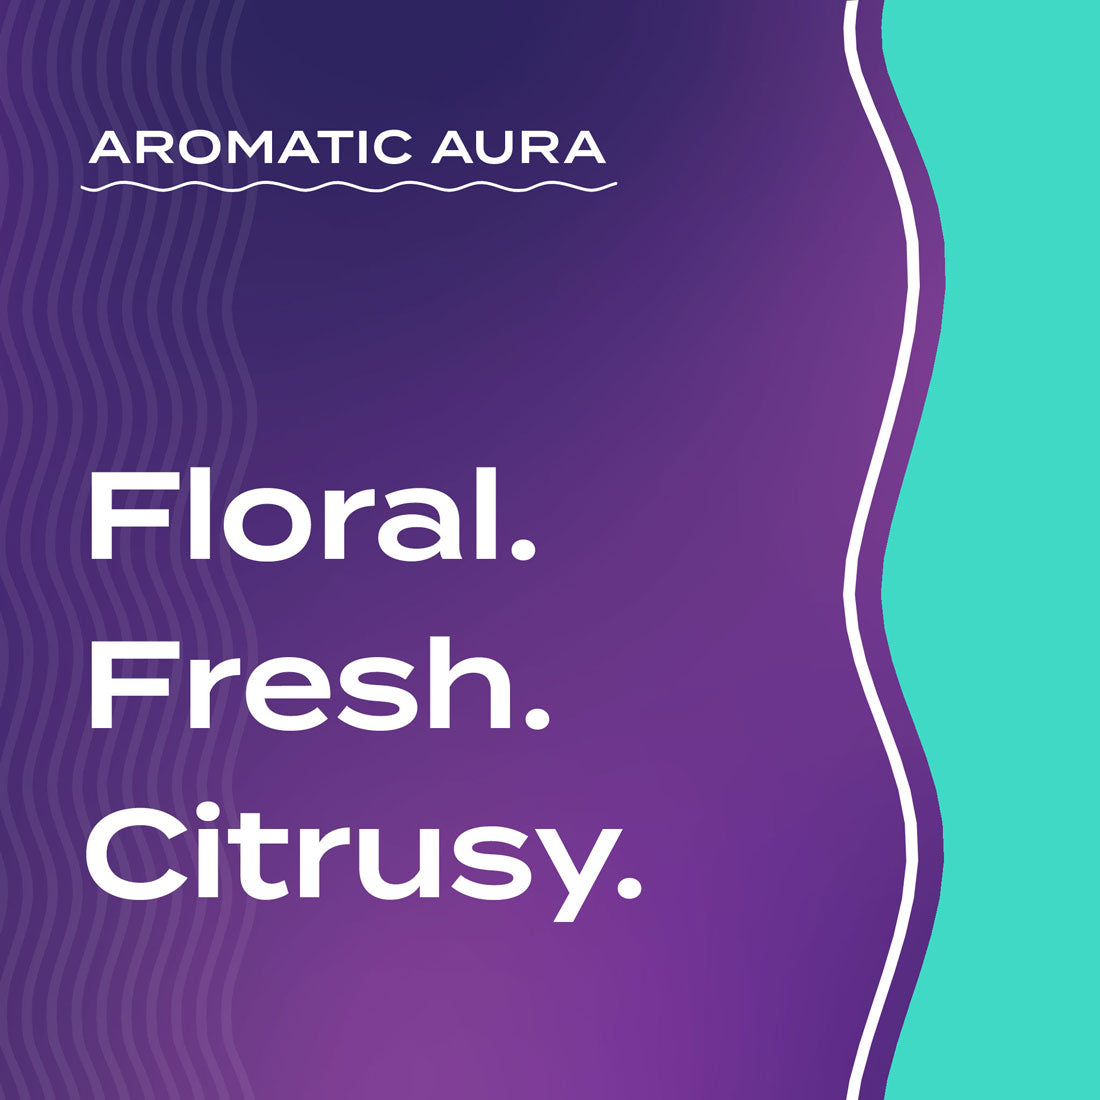 Text graphic depicting the aromatic aroma of Sea Salt: floral, fresh, and citrusy.